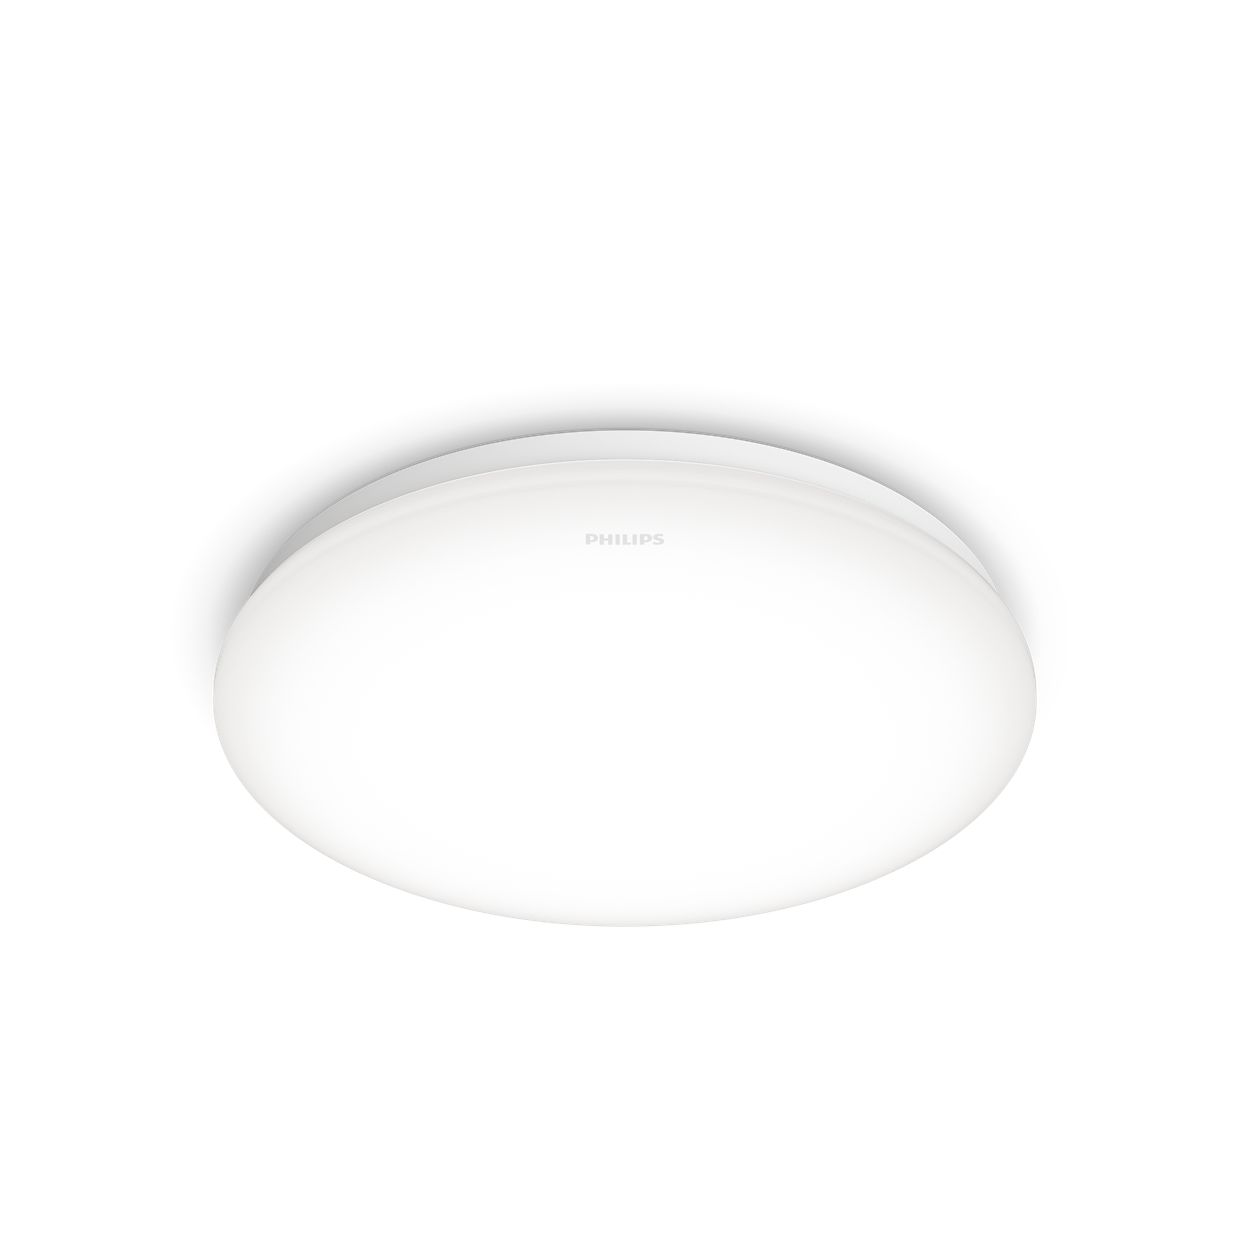 Comfortable LED light that's easy on your eyes